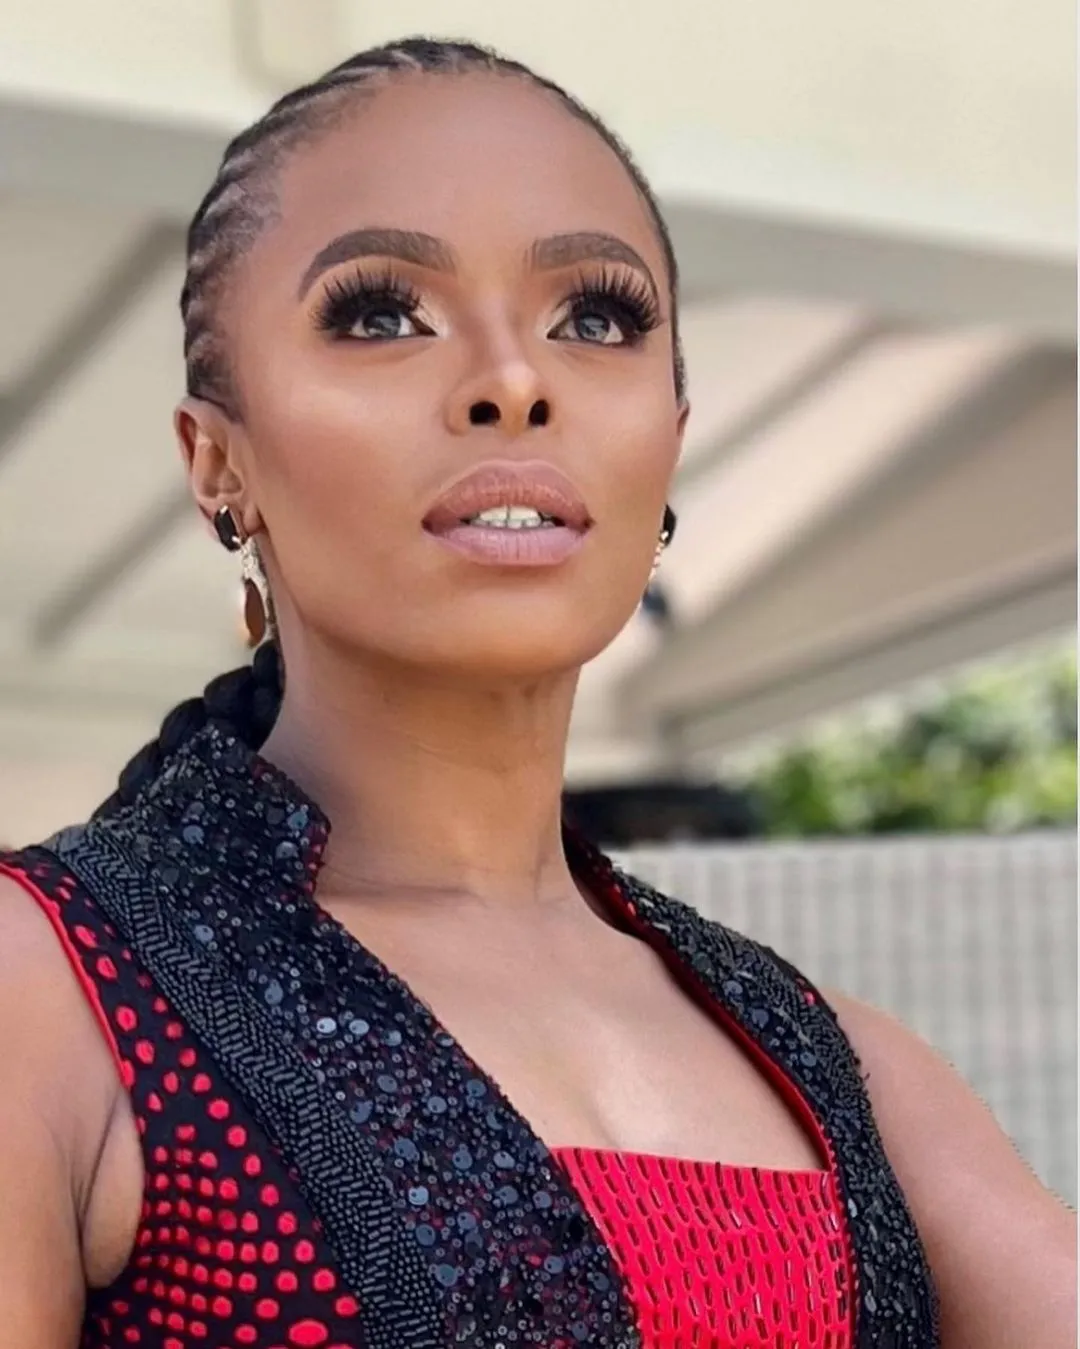 Former SA Idols judge, Unathi Nkayi breathes fire after officials cut electricity at her house